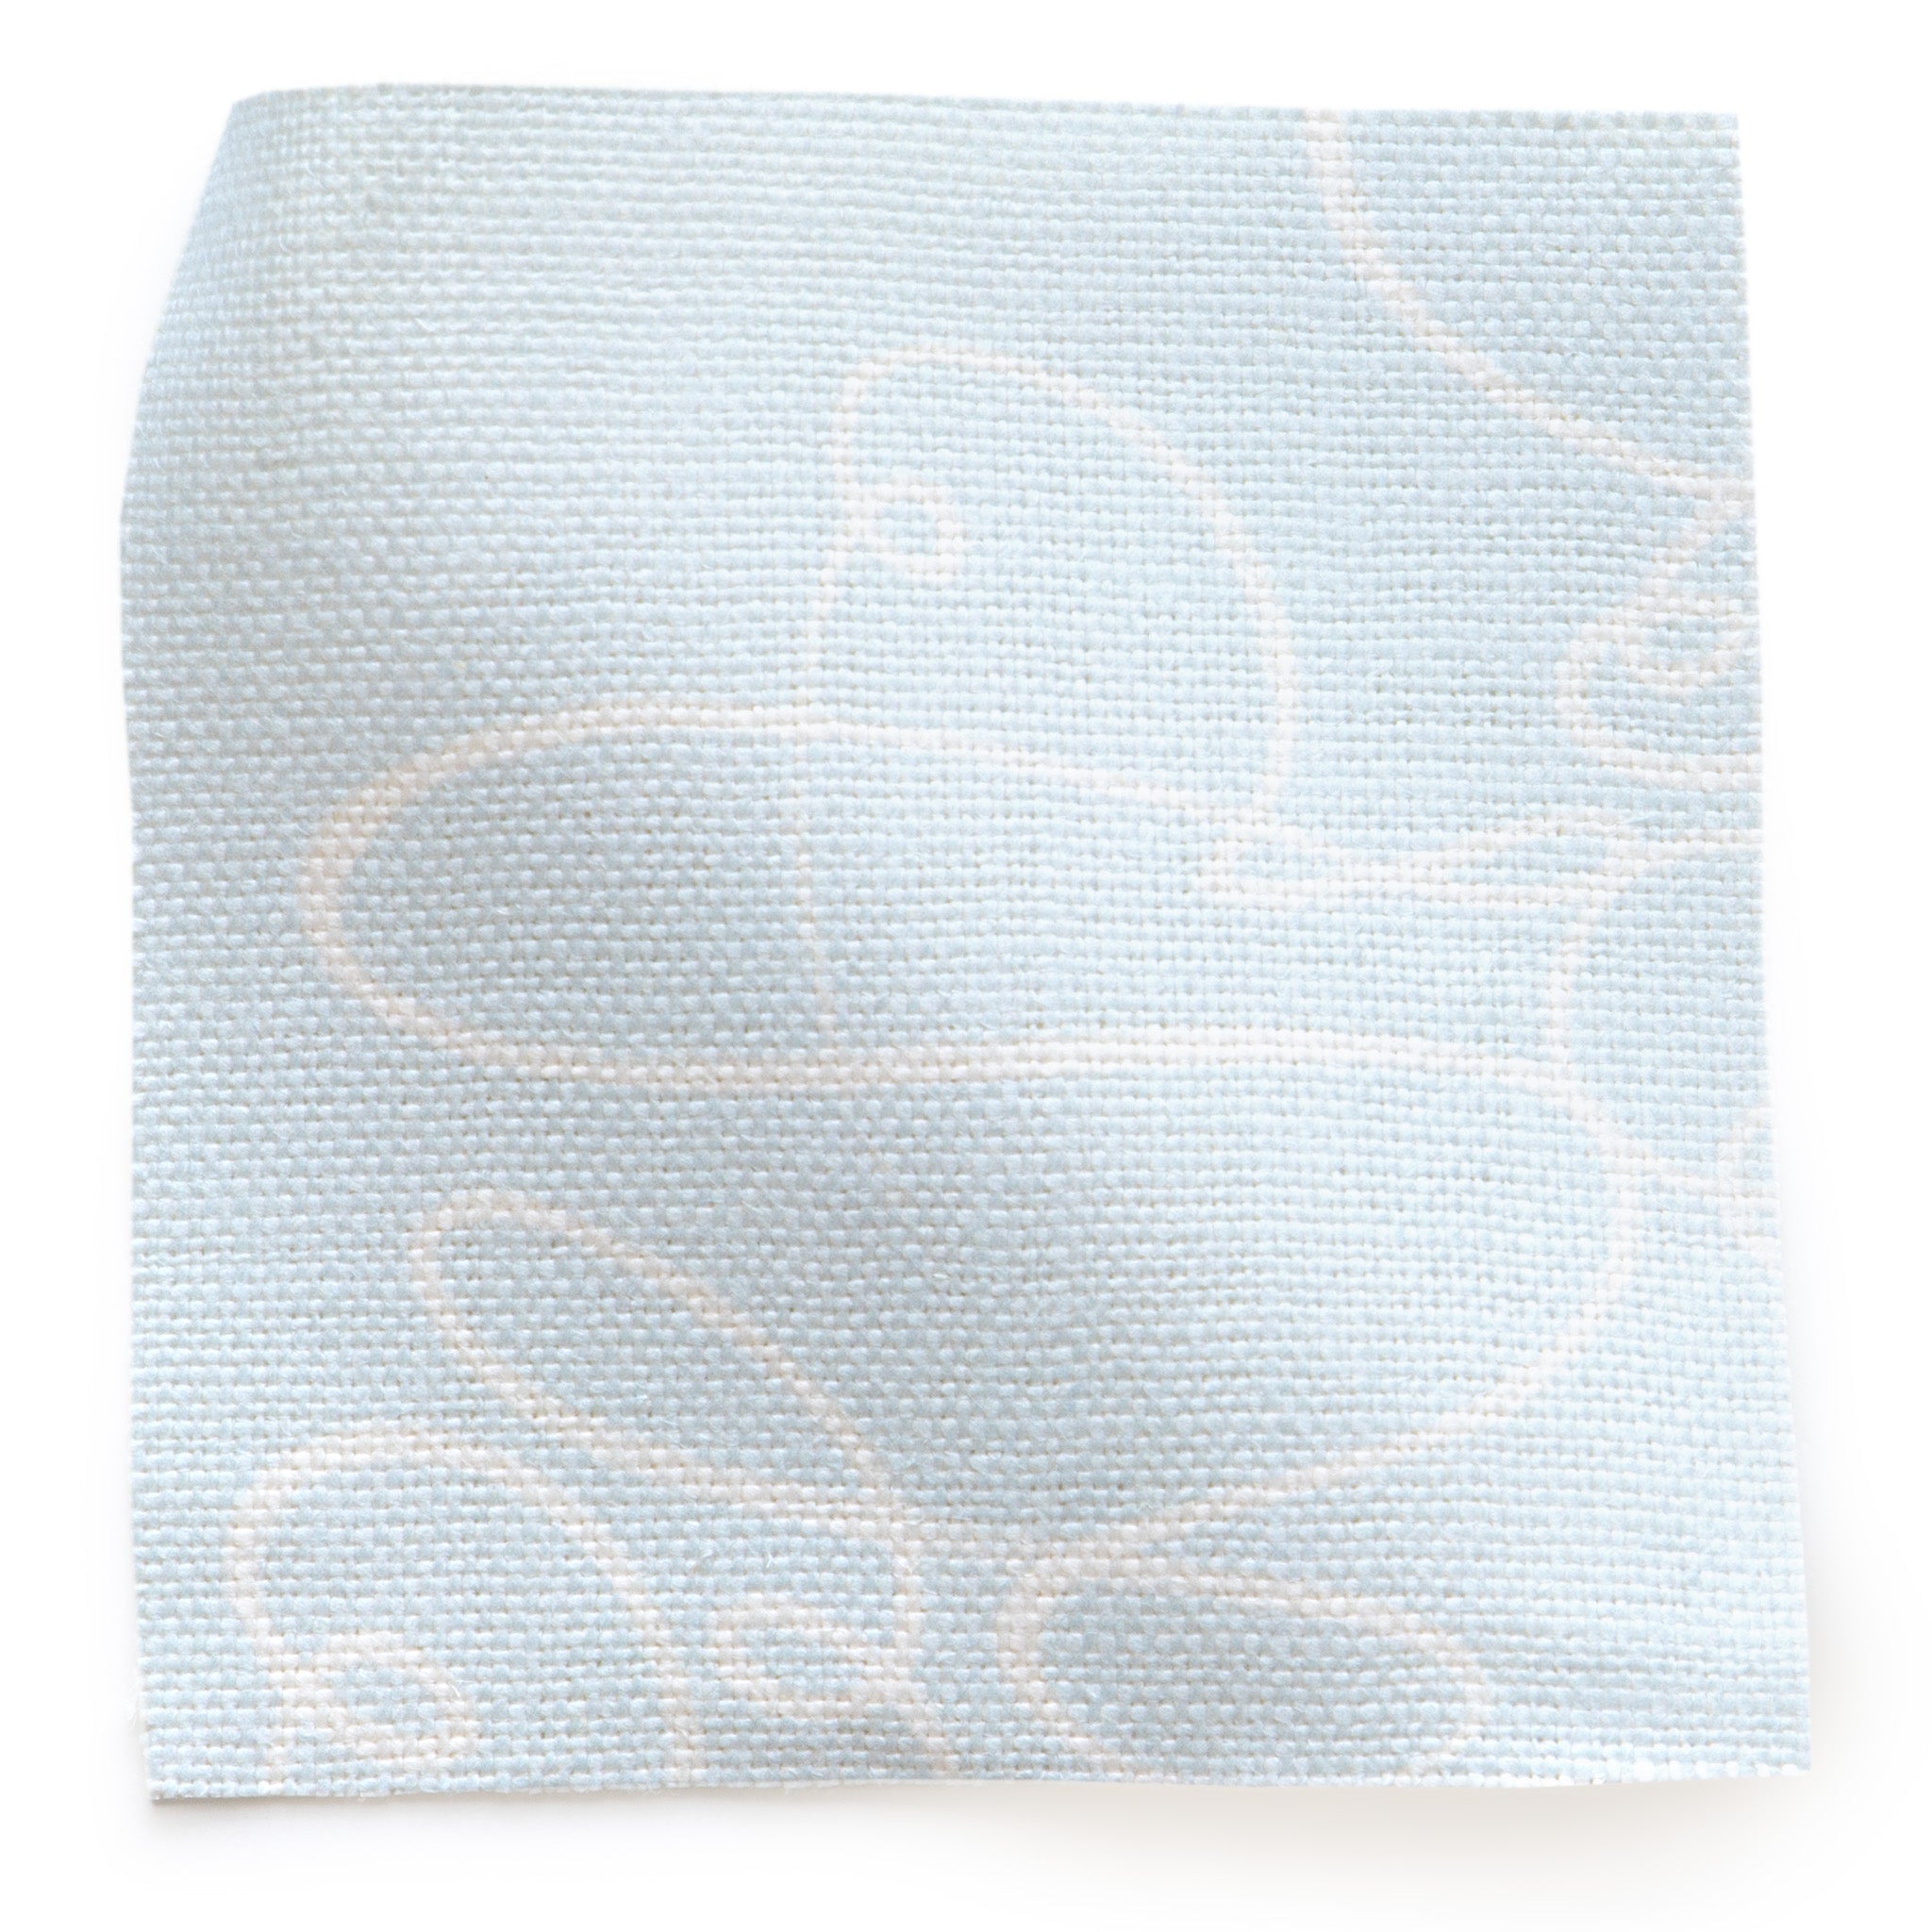 Powder Blue Abstract Printed Linen Swatch